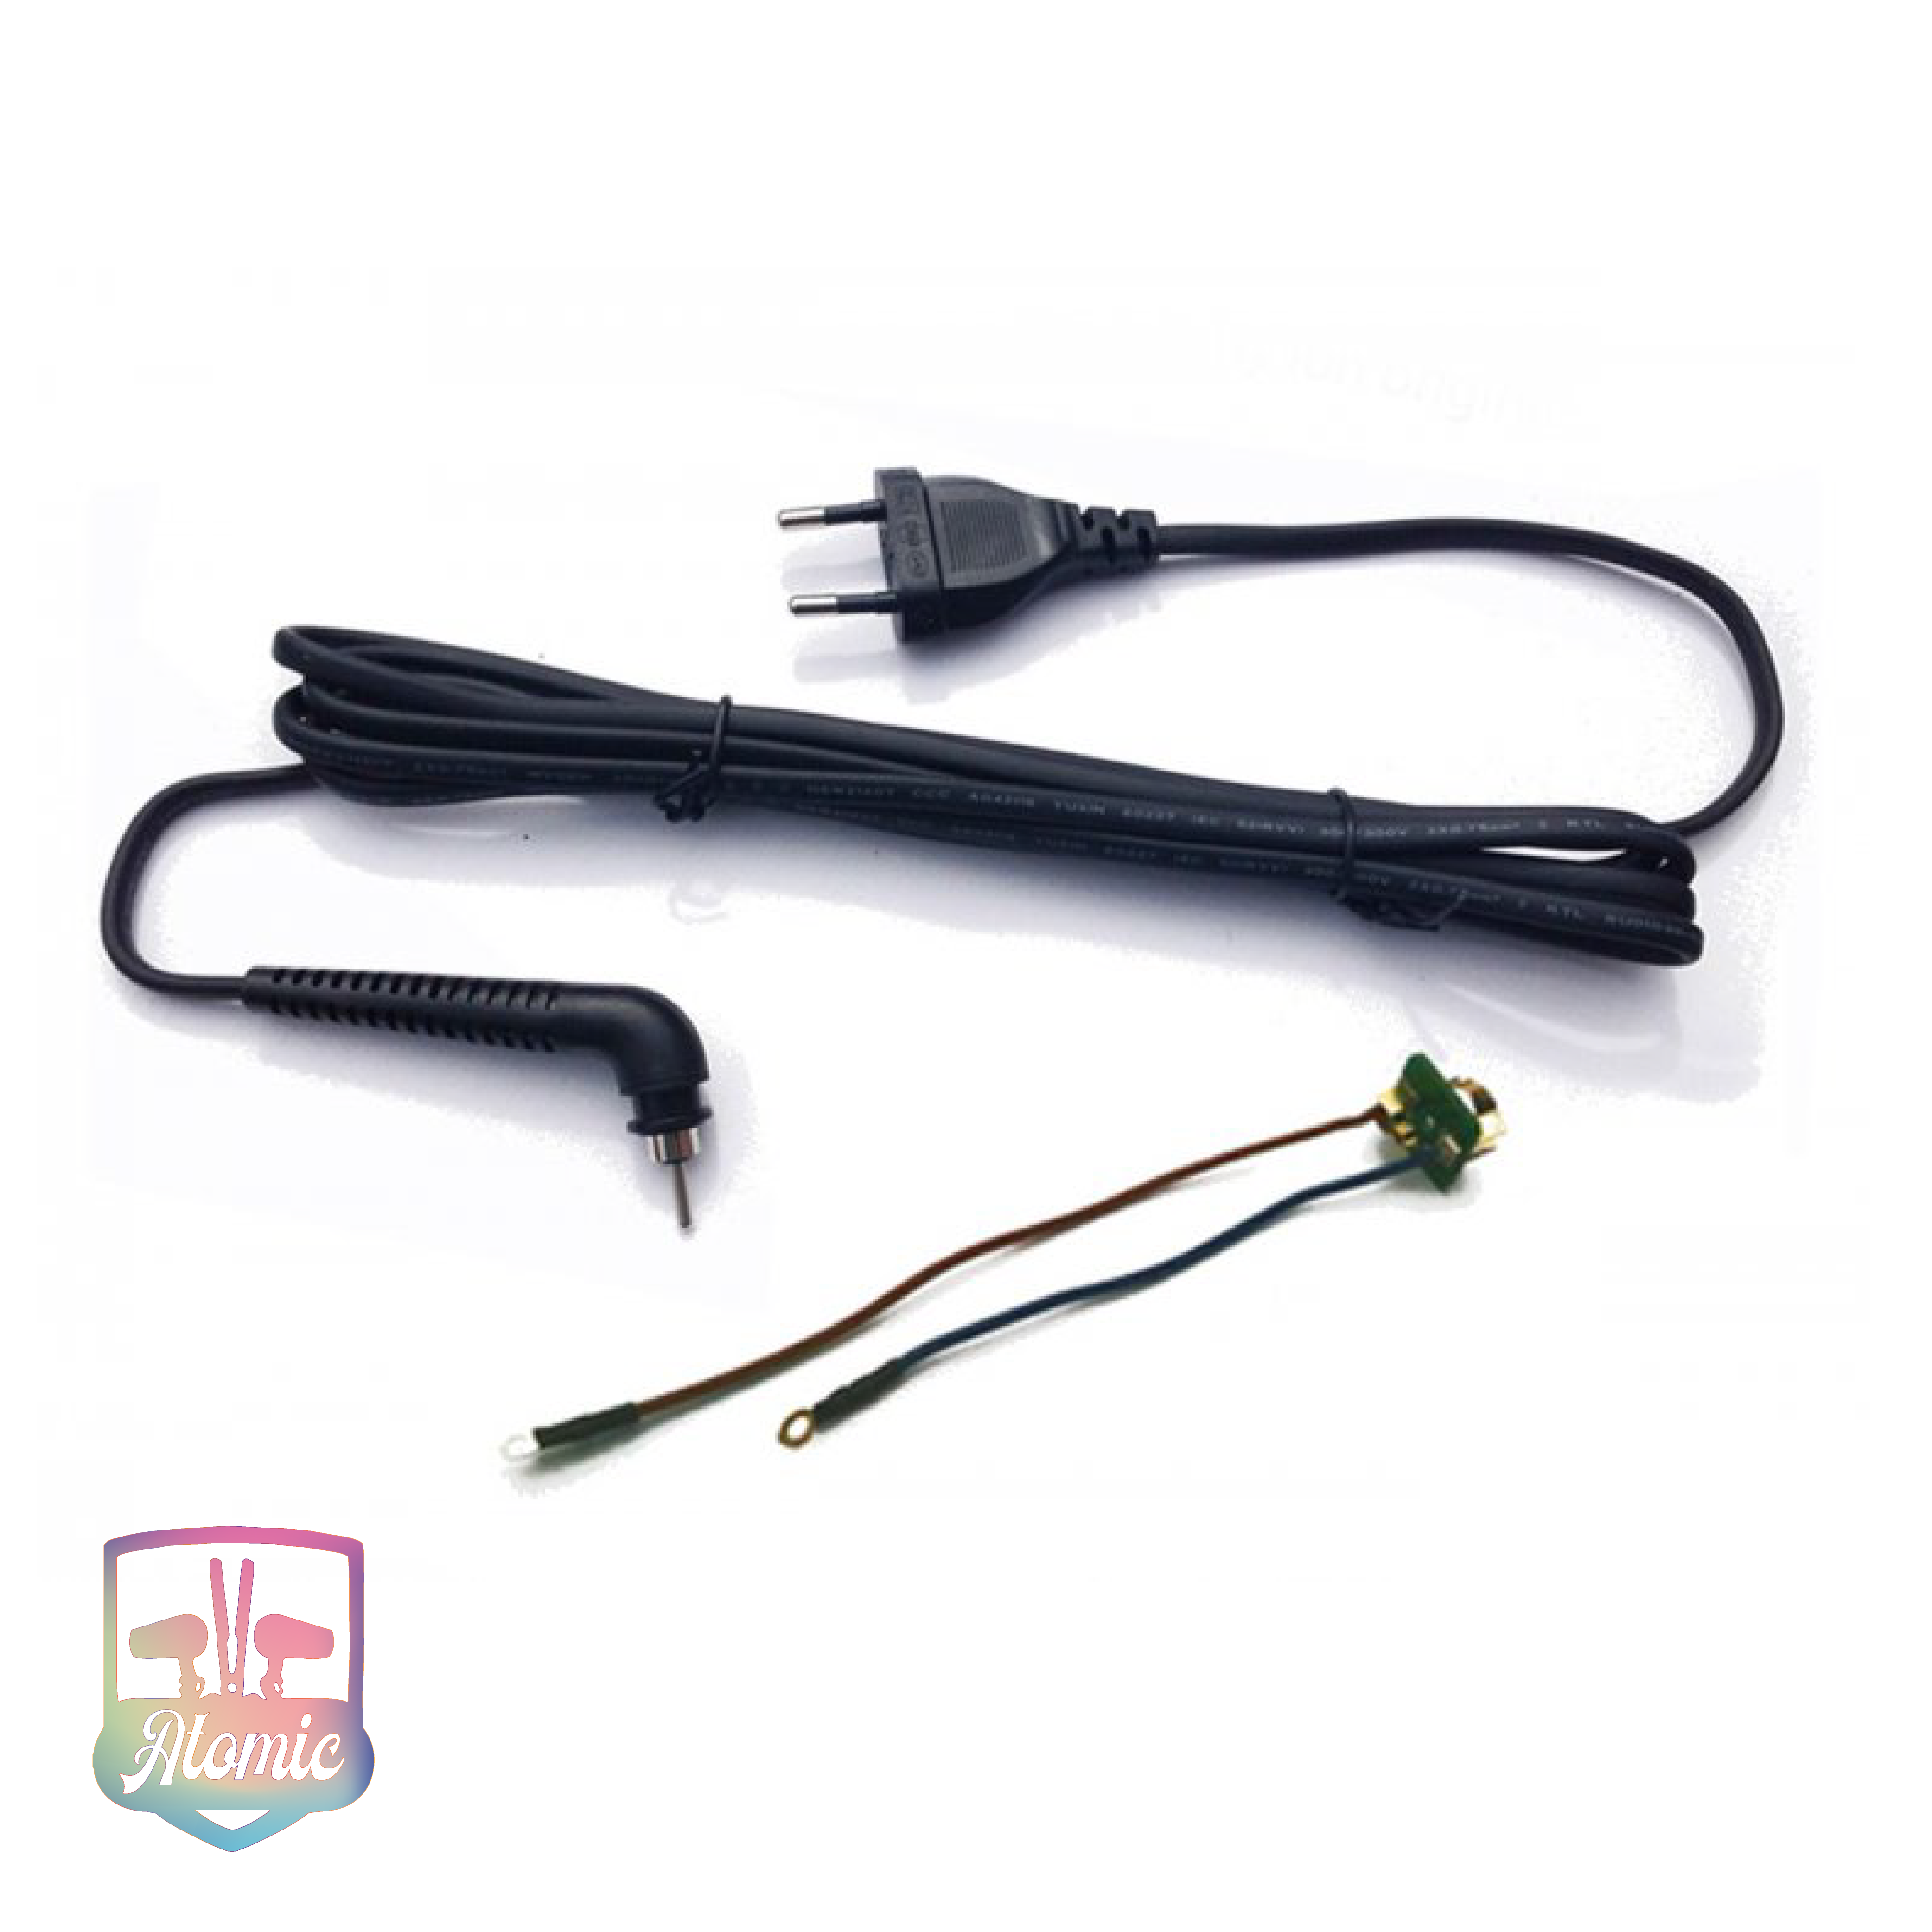 MK3 VDE POWER CABLE & CONNECTOR